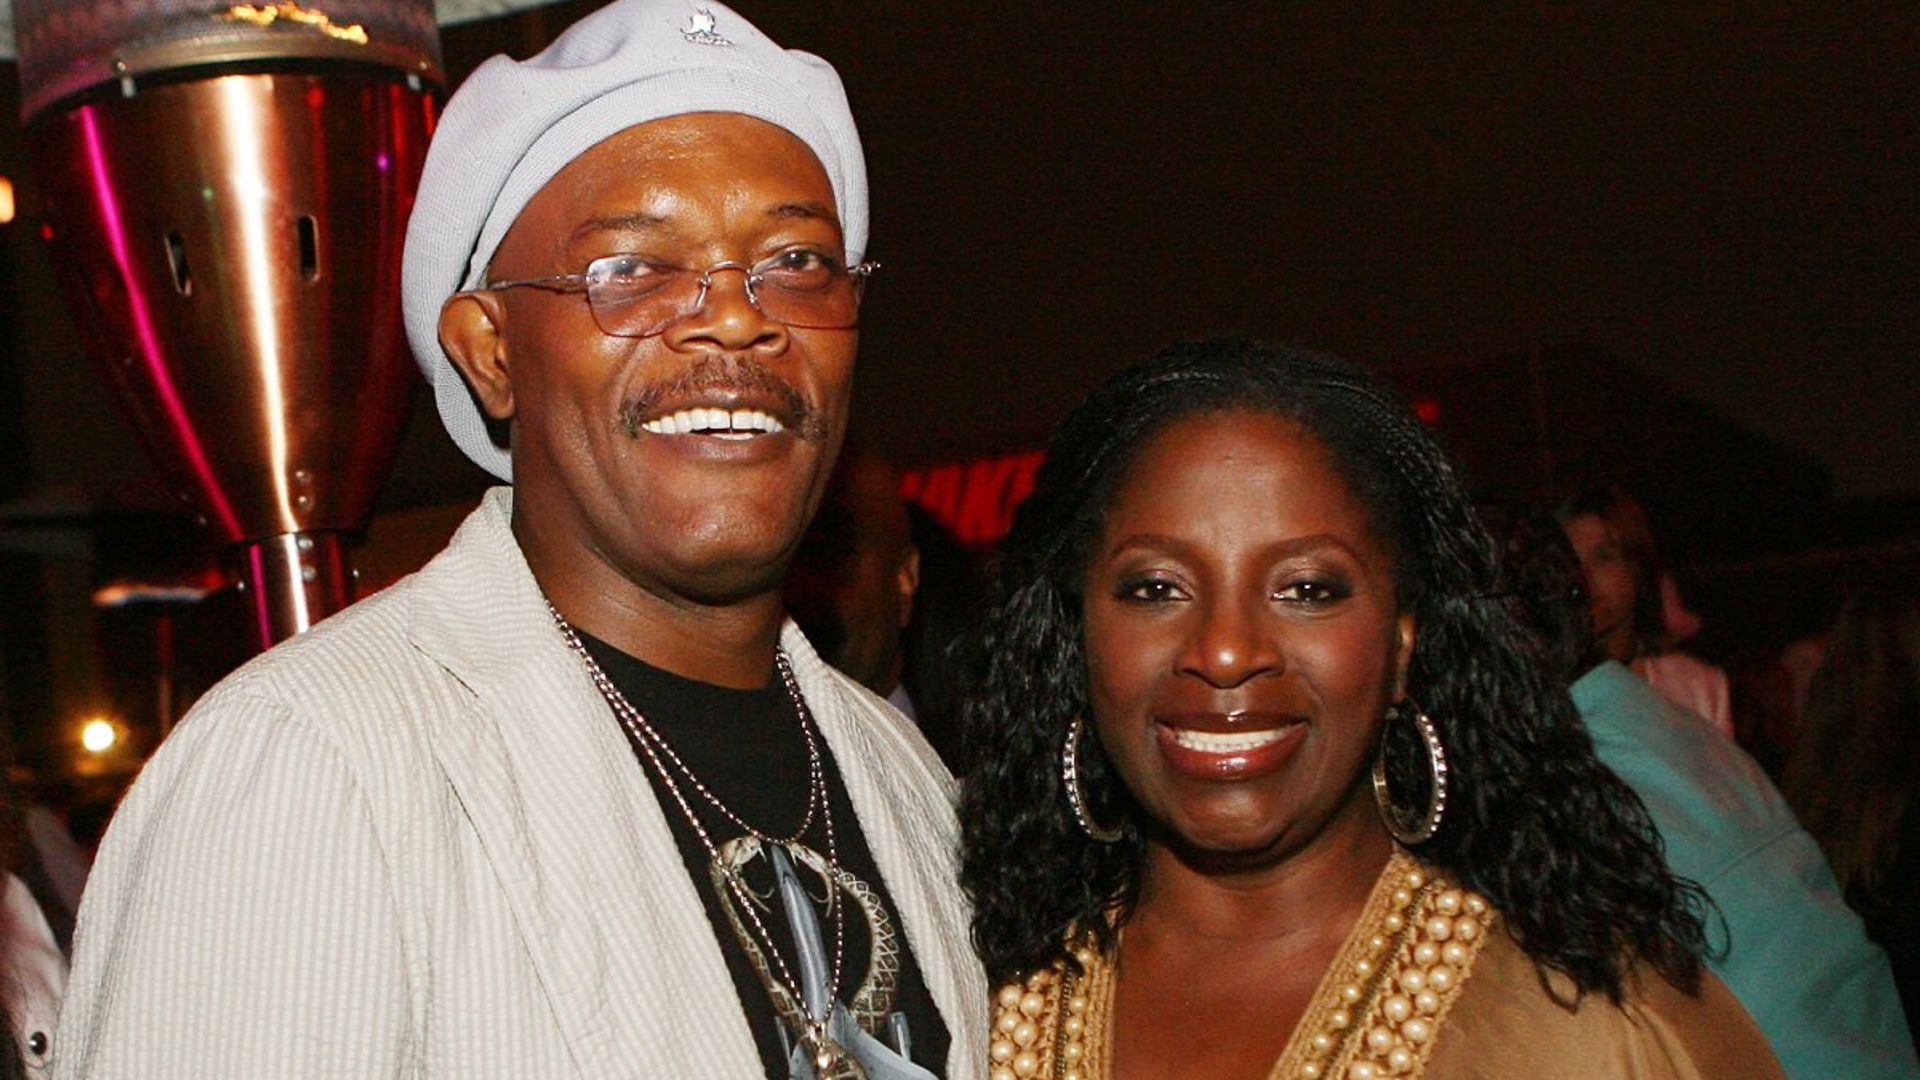 Samuel L Jackson praises wife of 41 years for sticking by his side after drug addiction